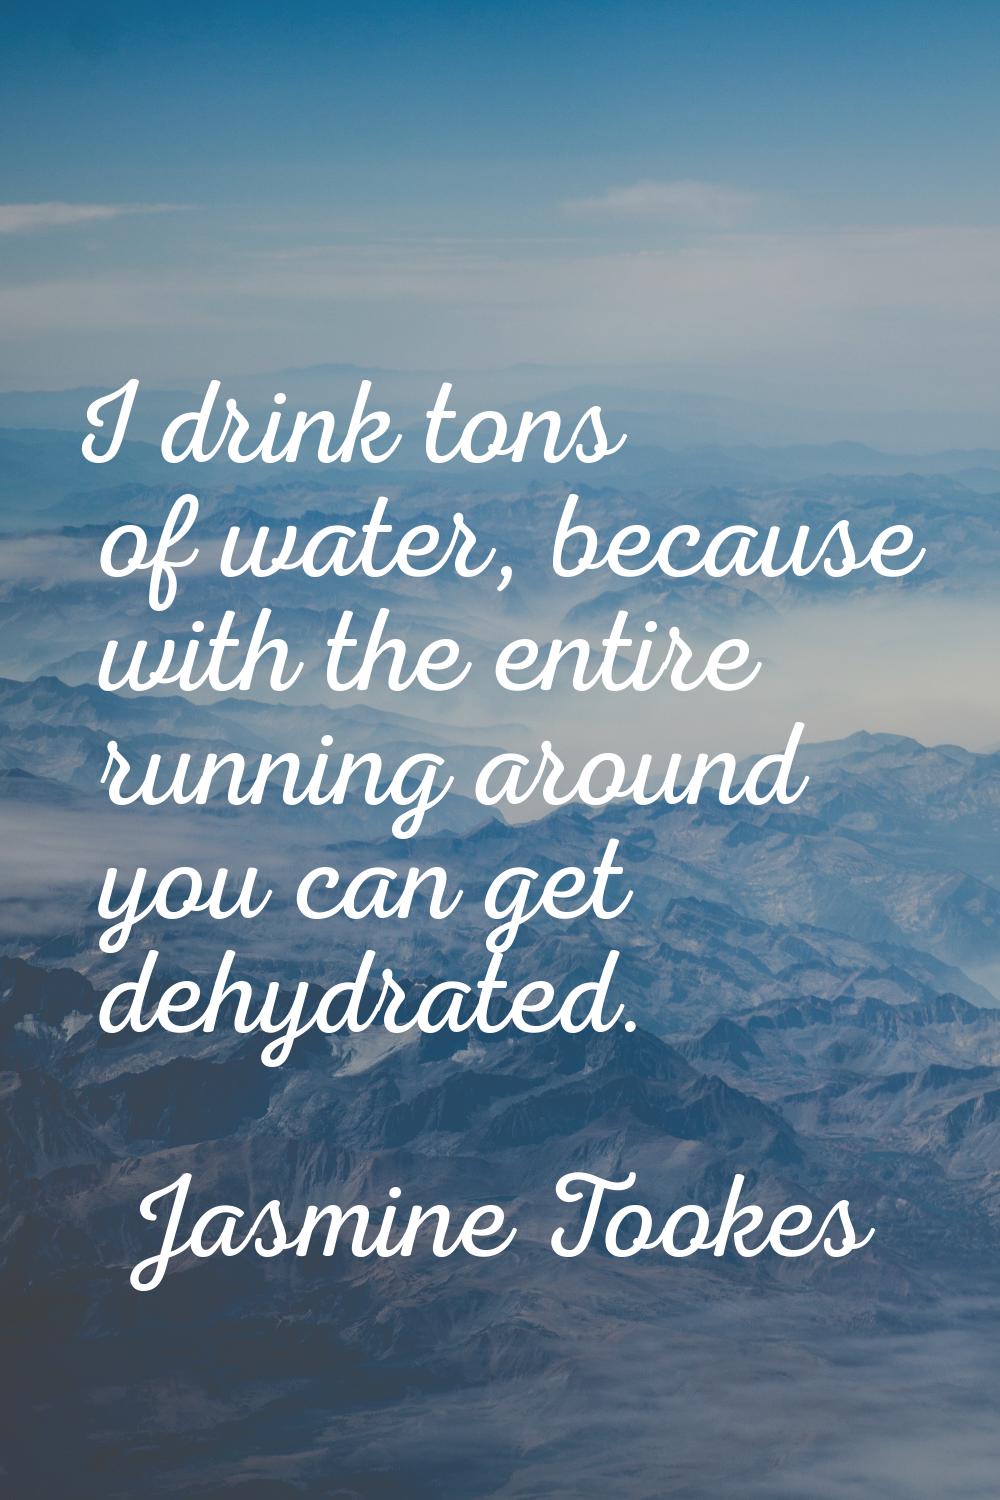 I drink tons of water, because with the entire running around you can get dehydrated.